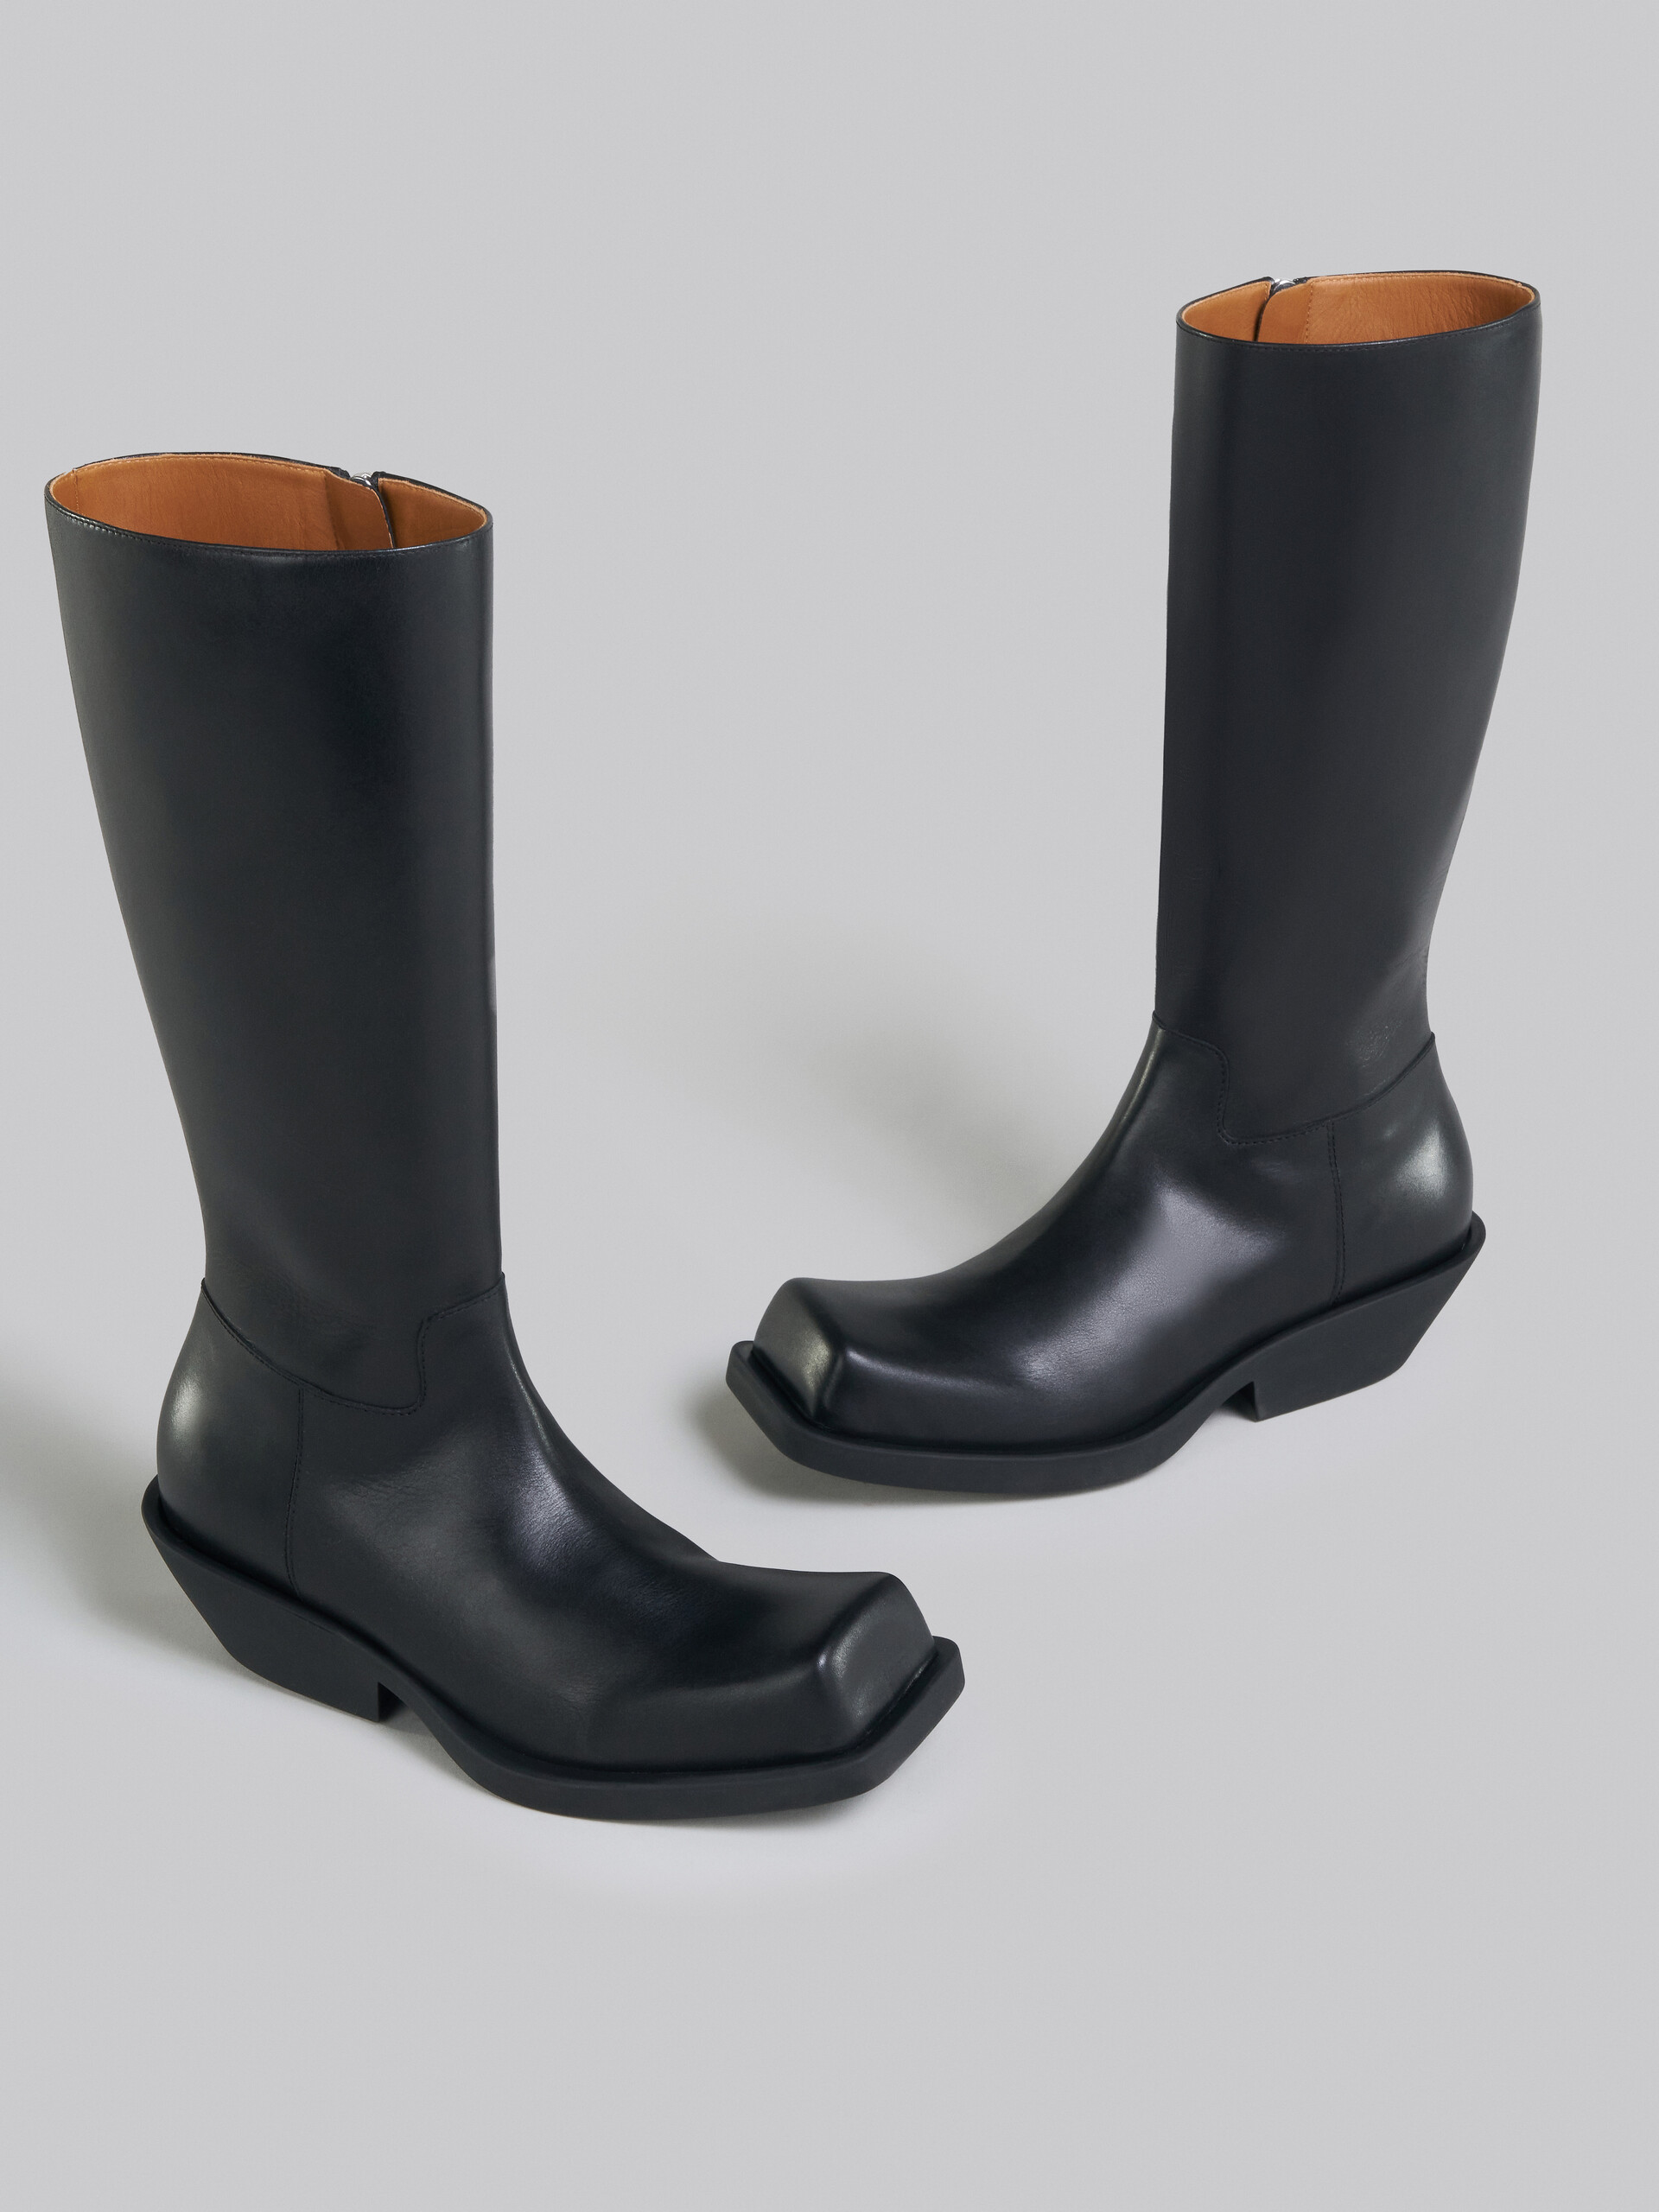 Black leather boot - Boots - Image 4